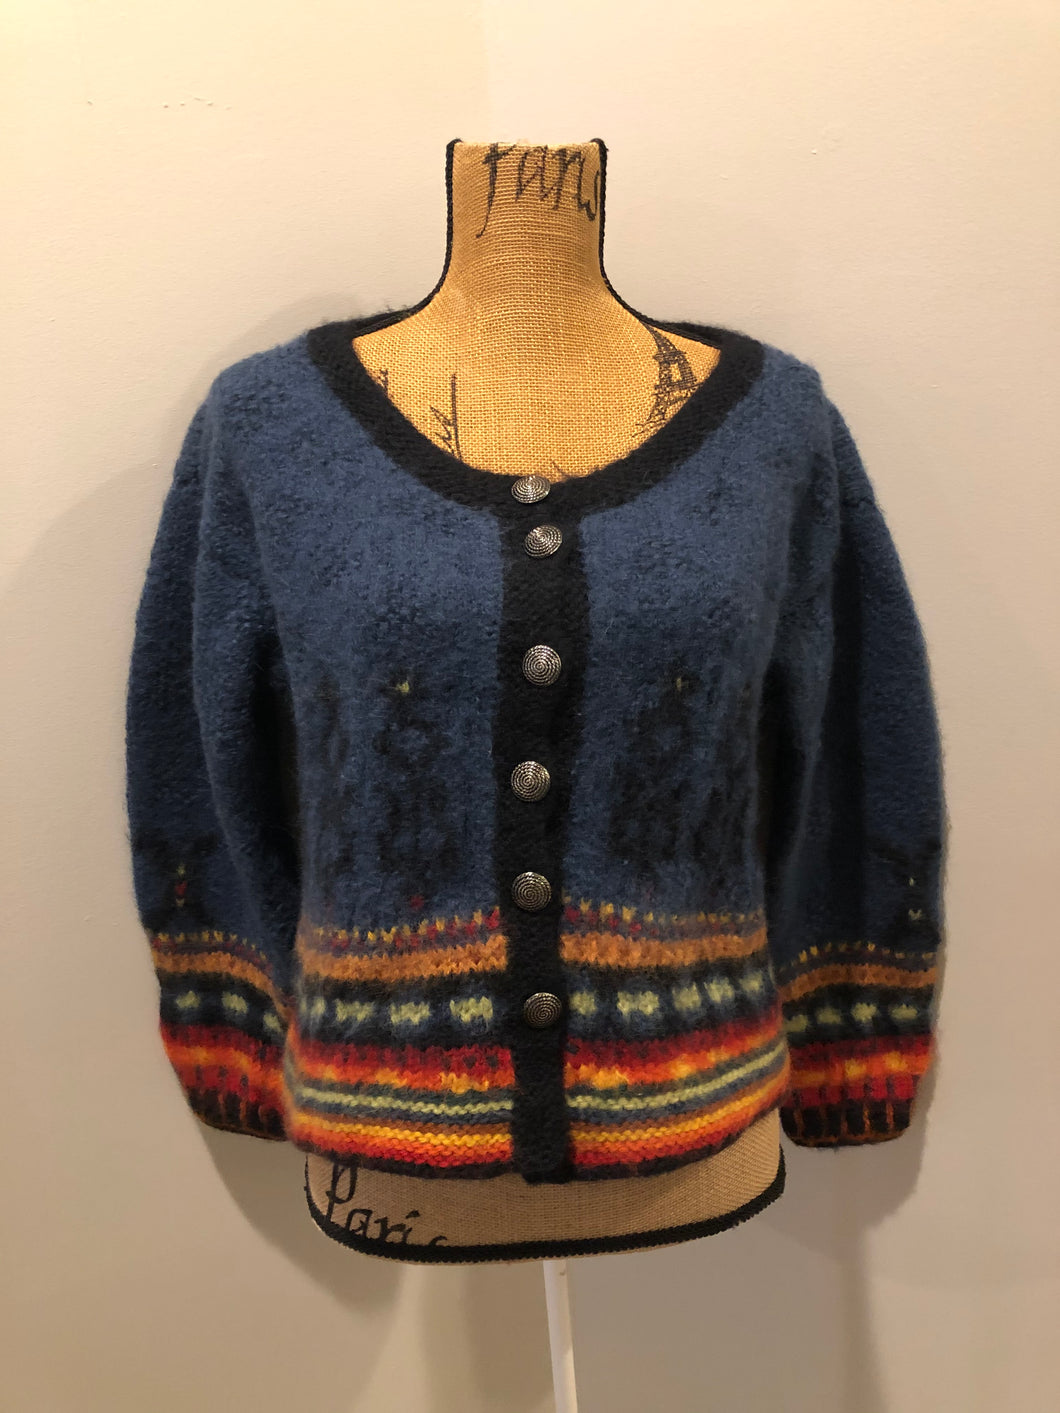 Kingspier Vintage - Emma “Kalveness Designs Ltd.” felted wool cardigan in navy blue with multi-coloured designs and silver button closures. Made in Canada. Size Small, medium. 
